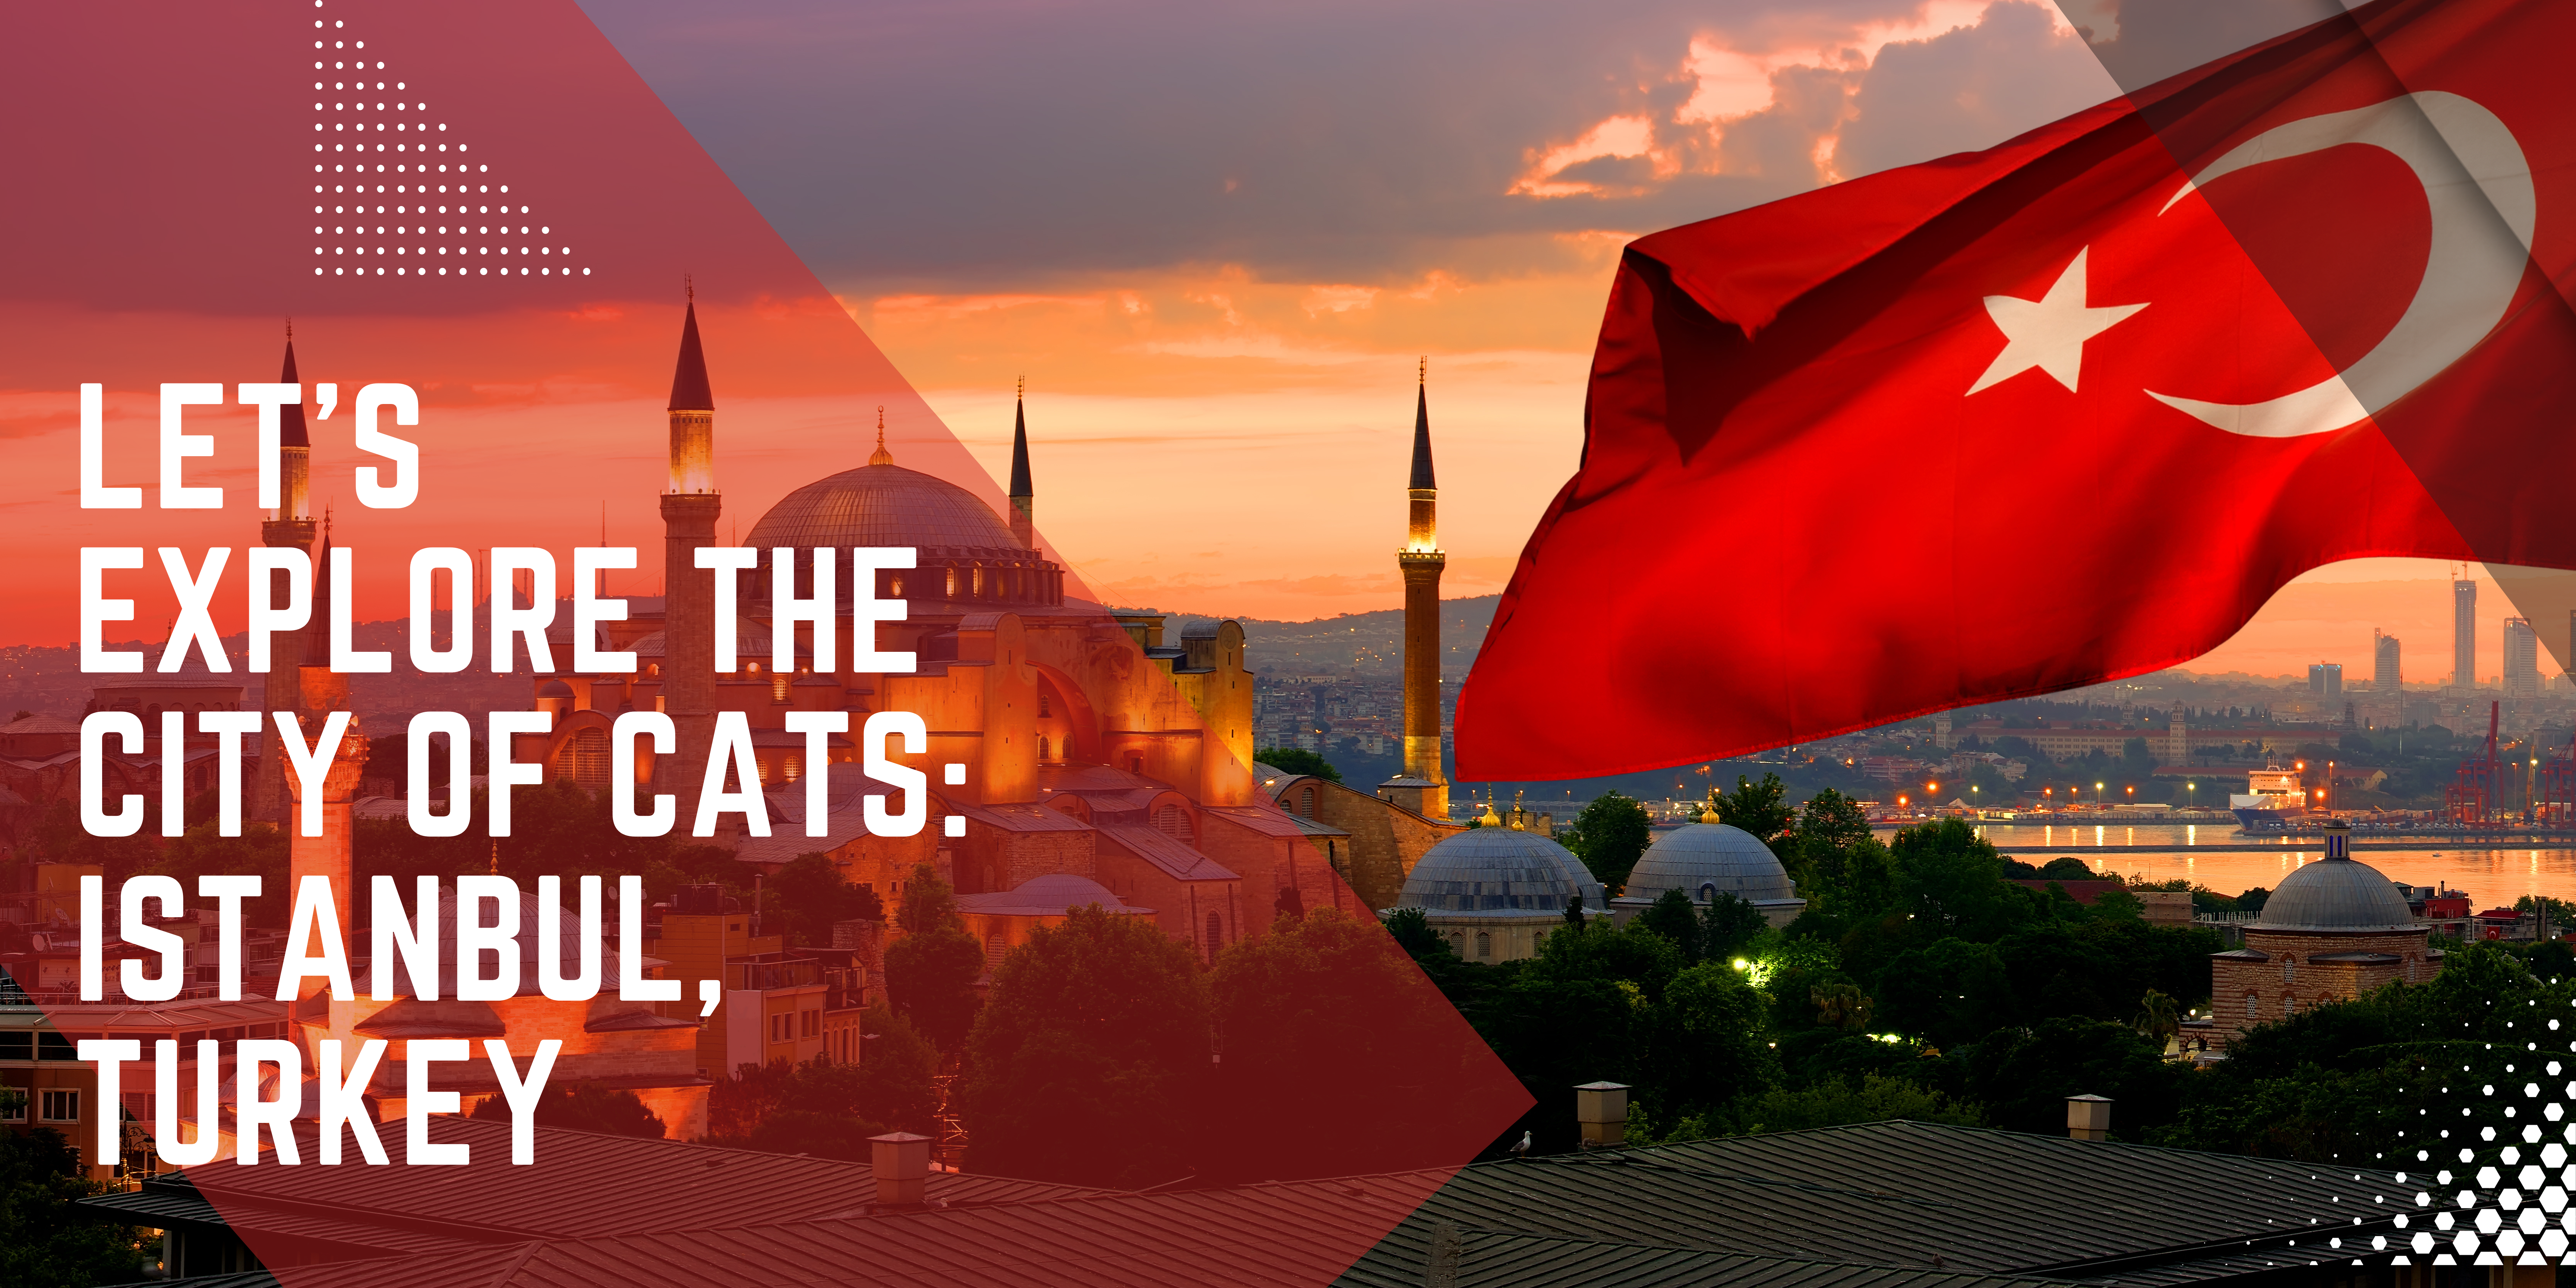 Let’s Explore the City of Cats: Istanbul, Turkey